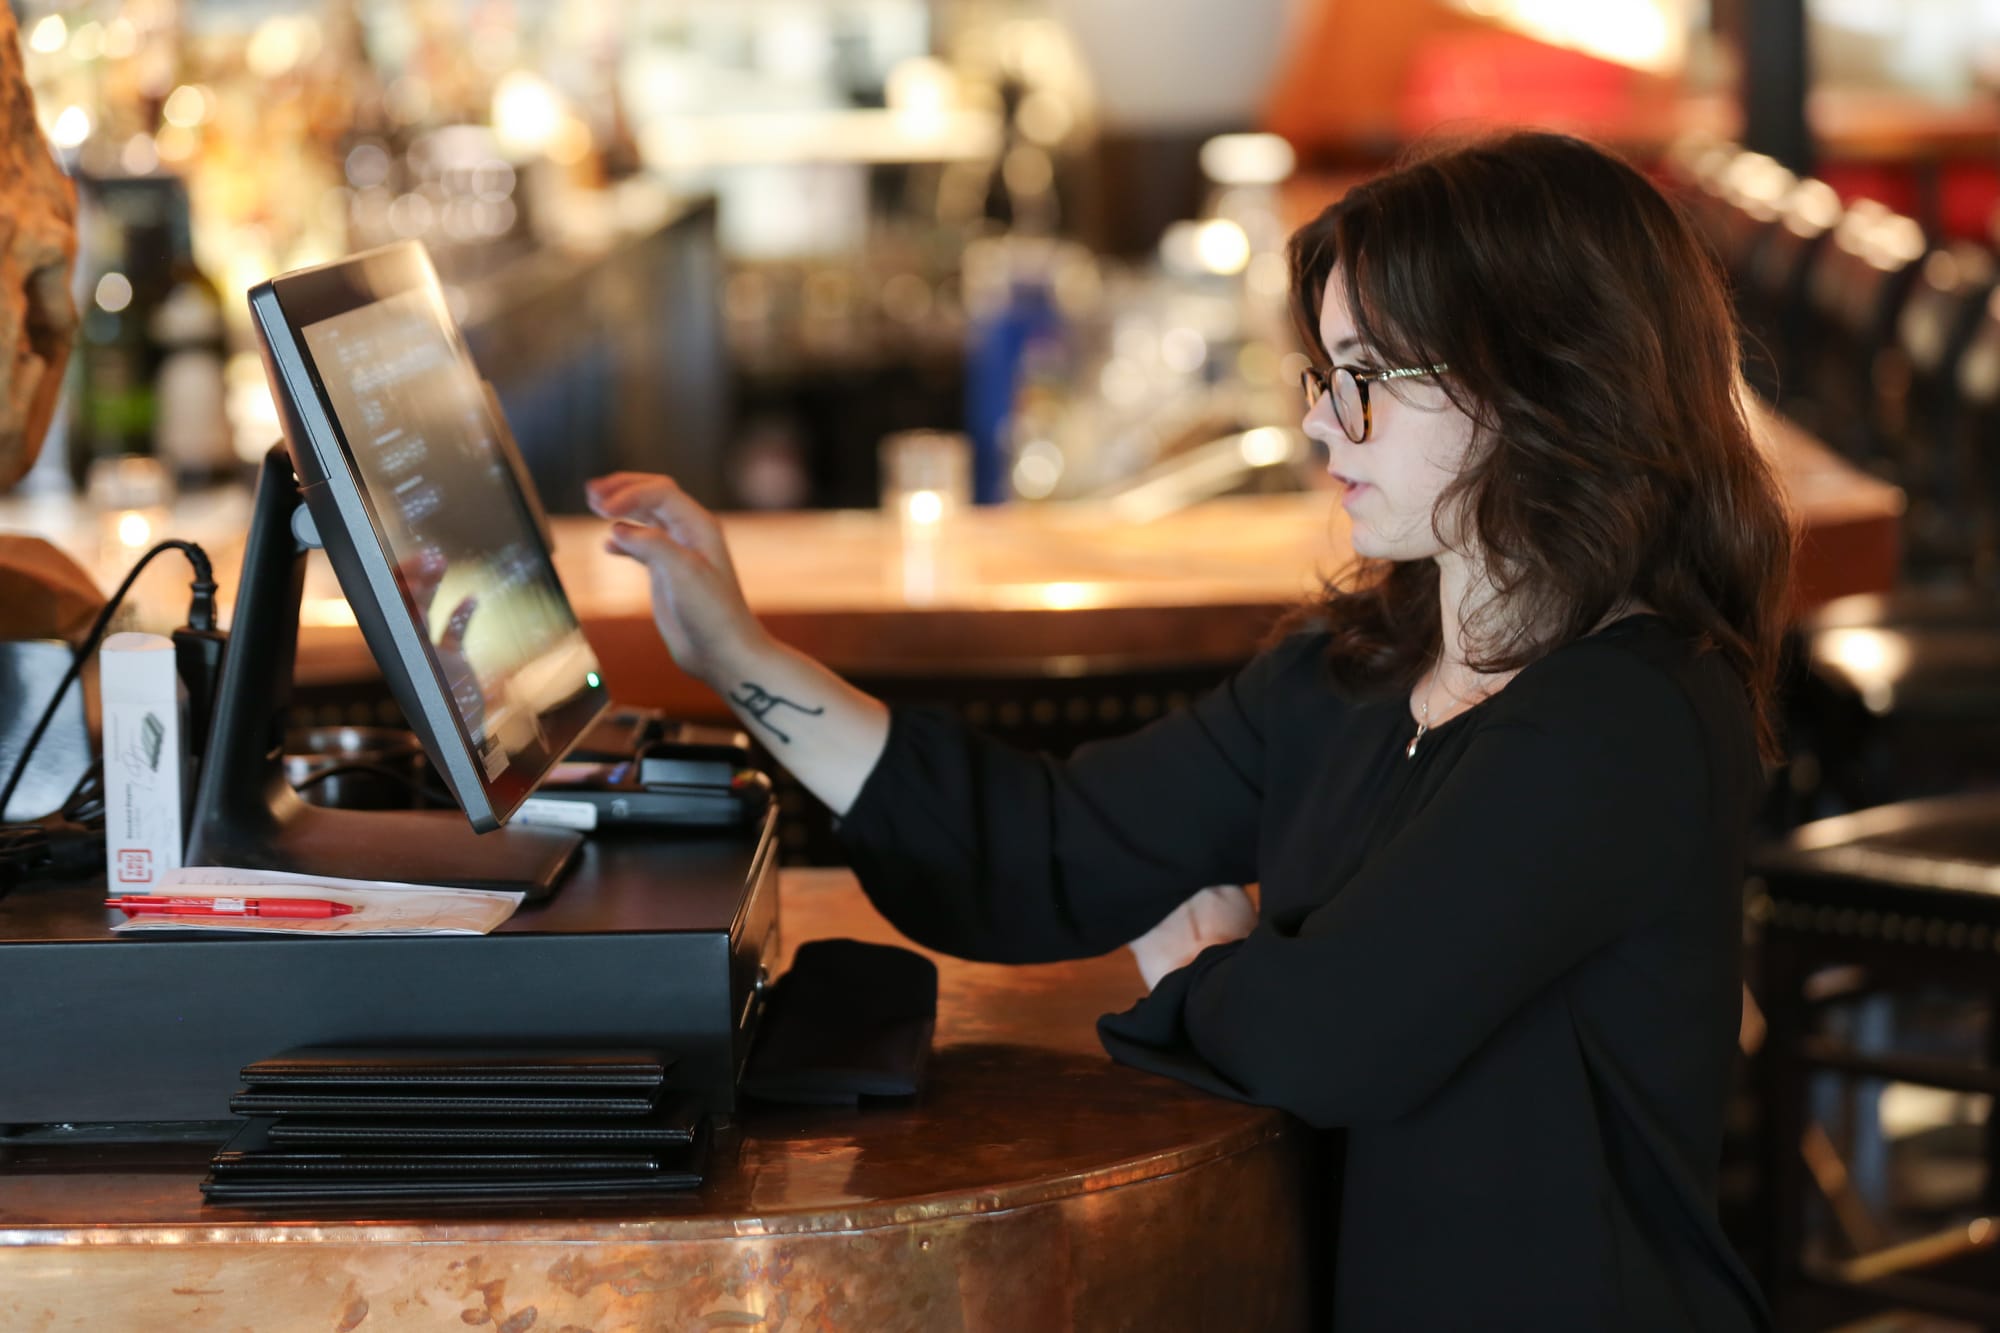 Michigan restaurant employee working at SpotOn point-of-sale system touchscreen